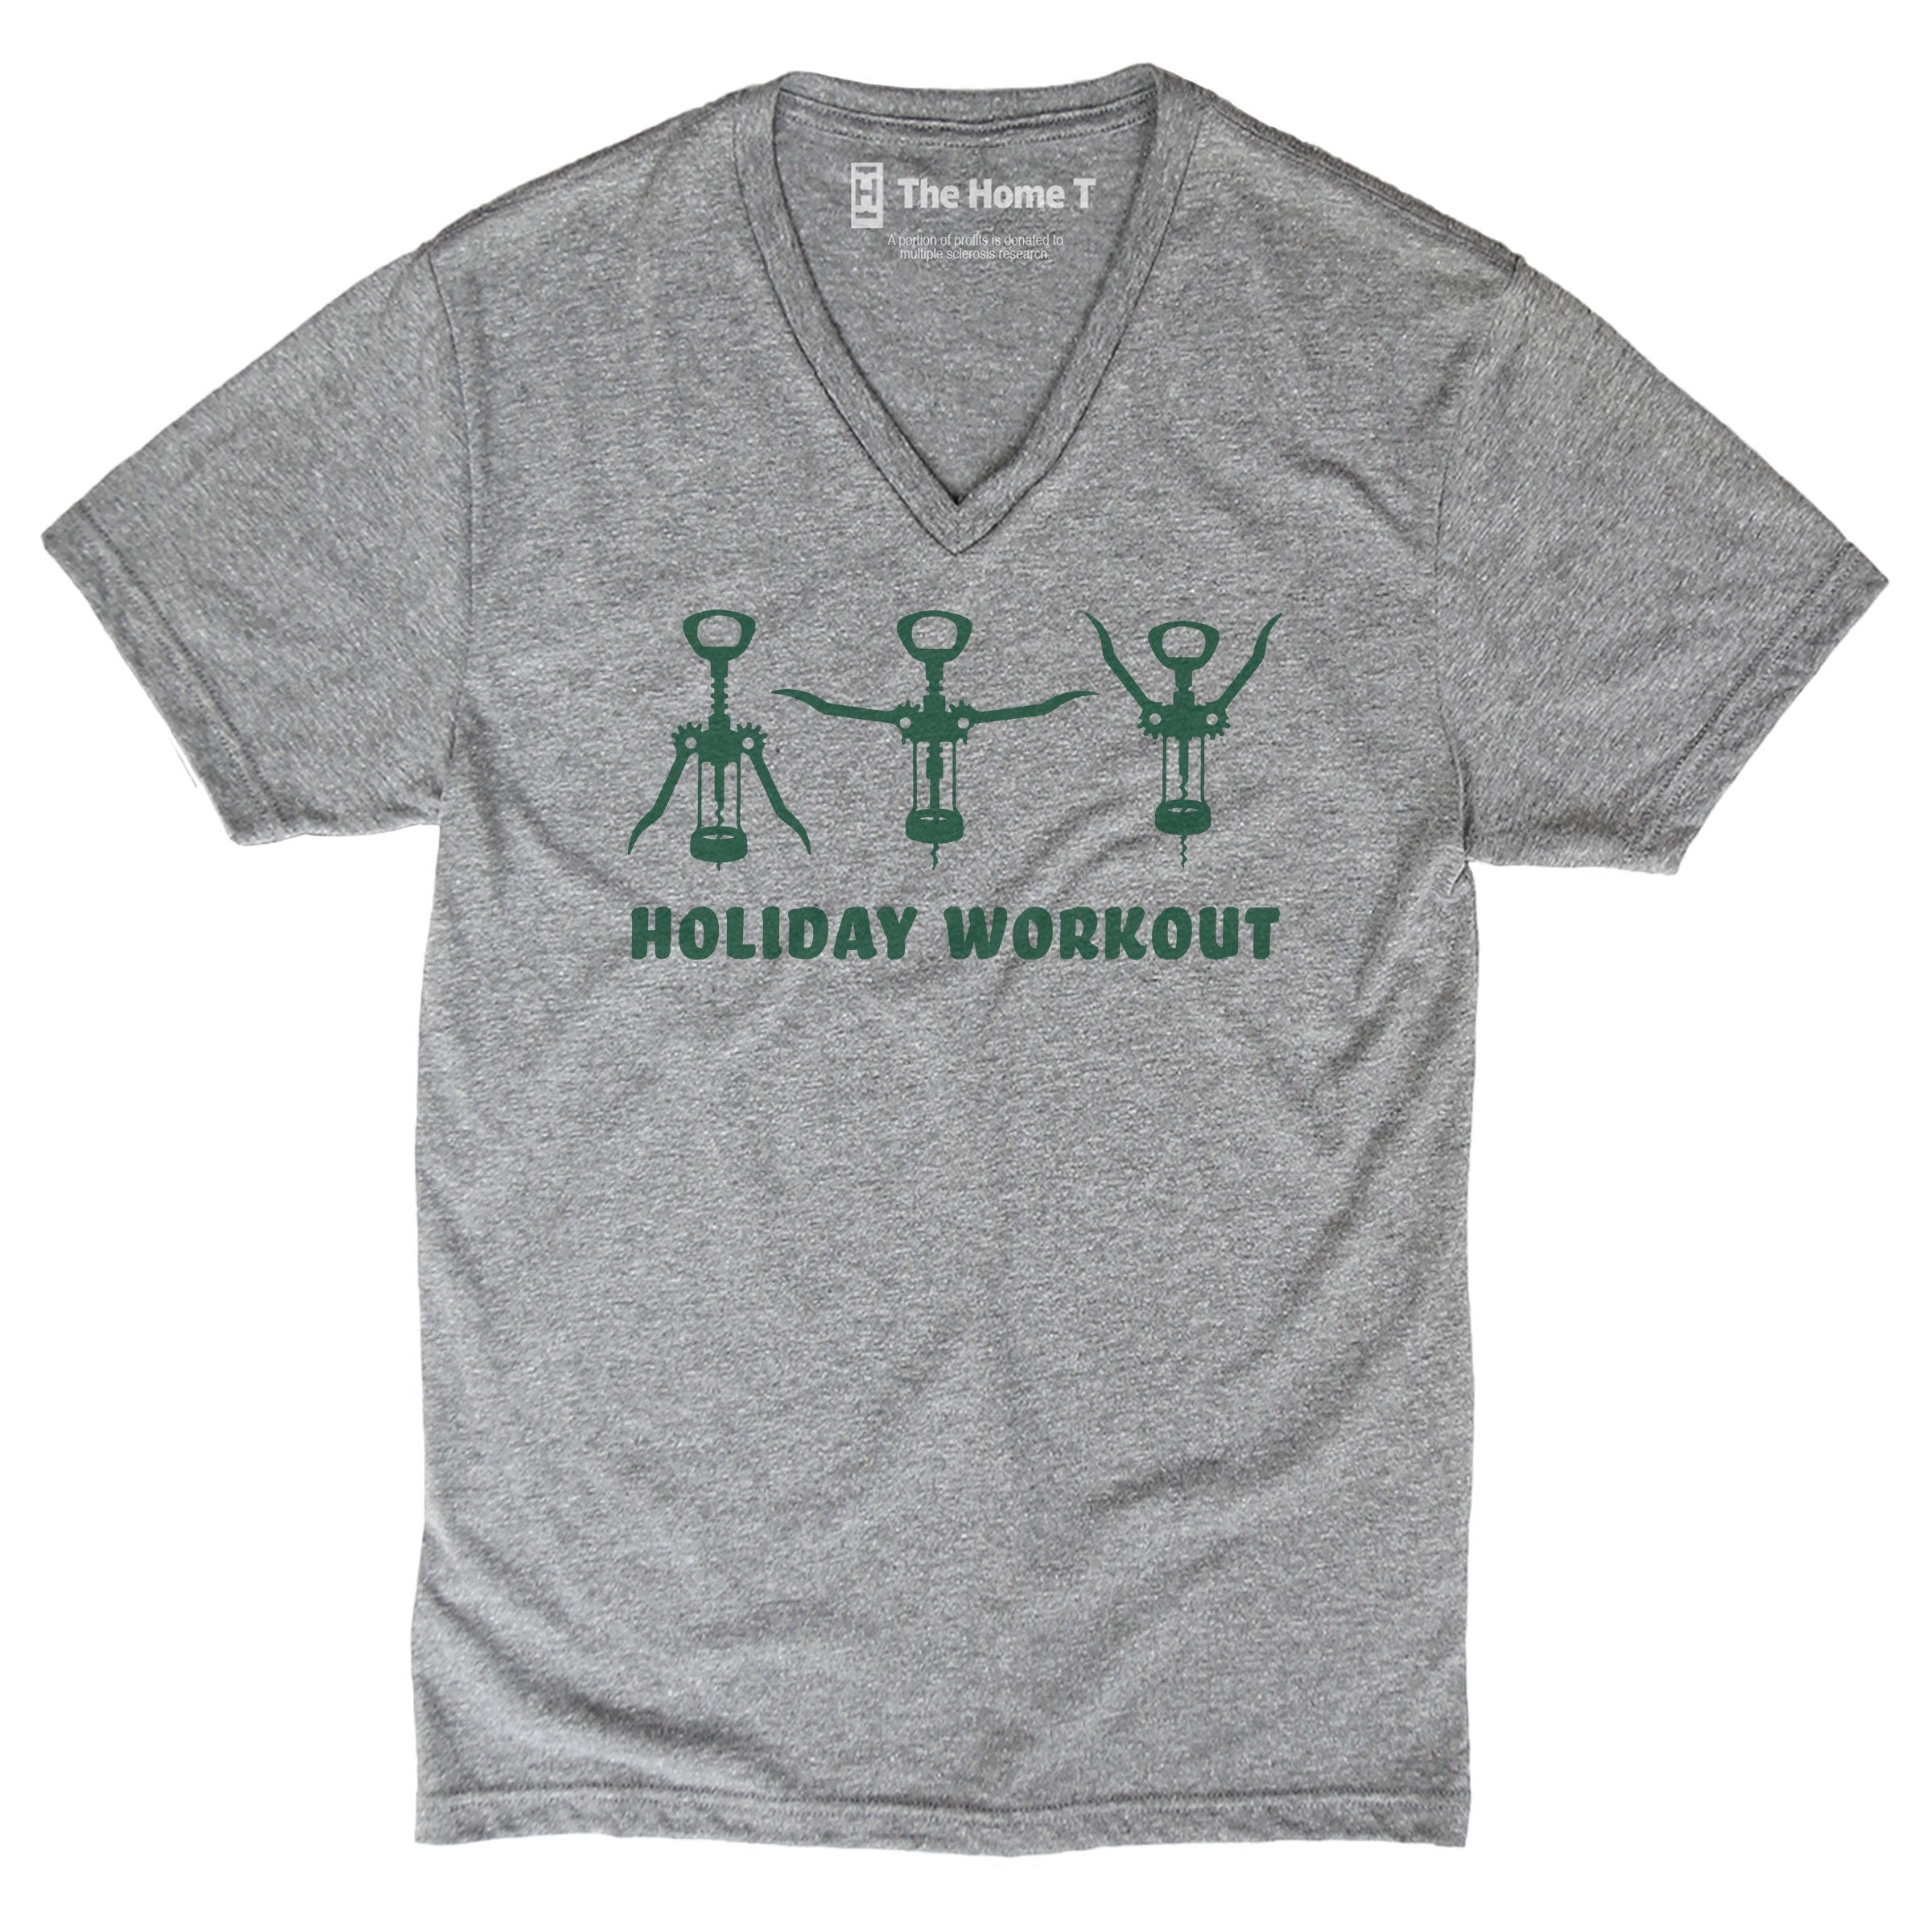 Holiday Workout Crew neck The Home T XS V-Neck